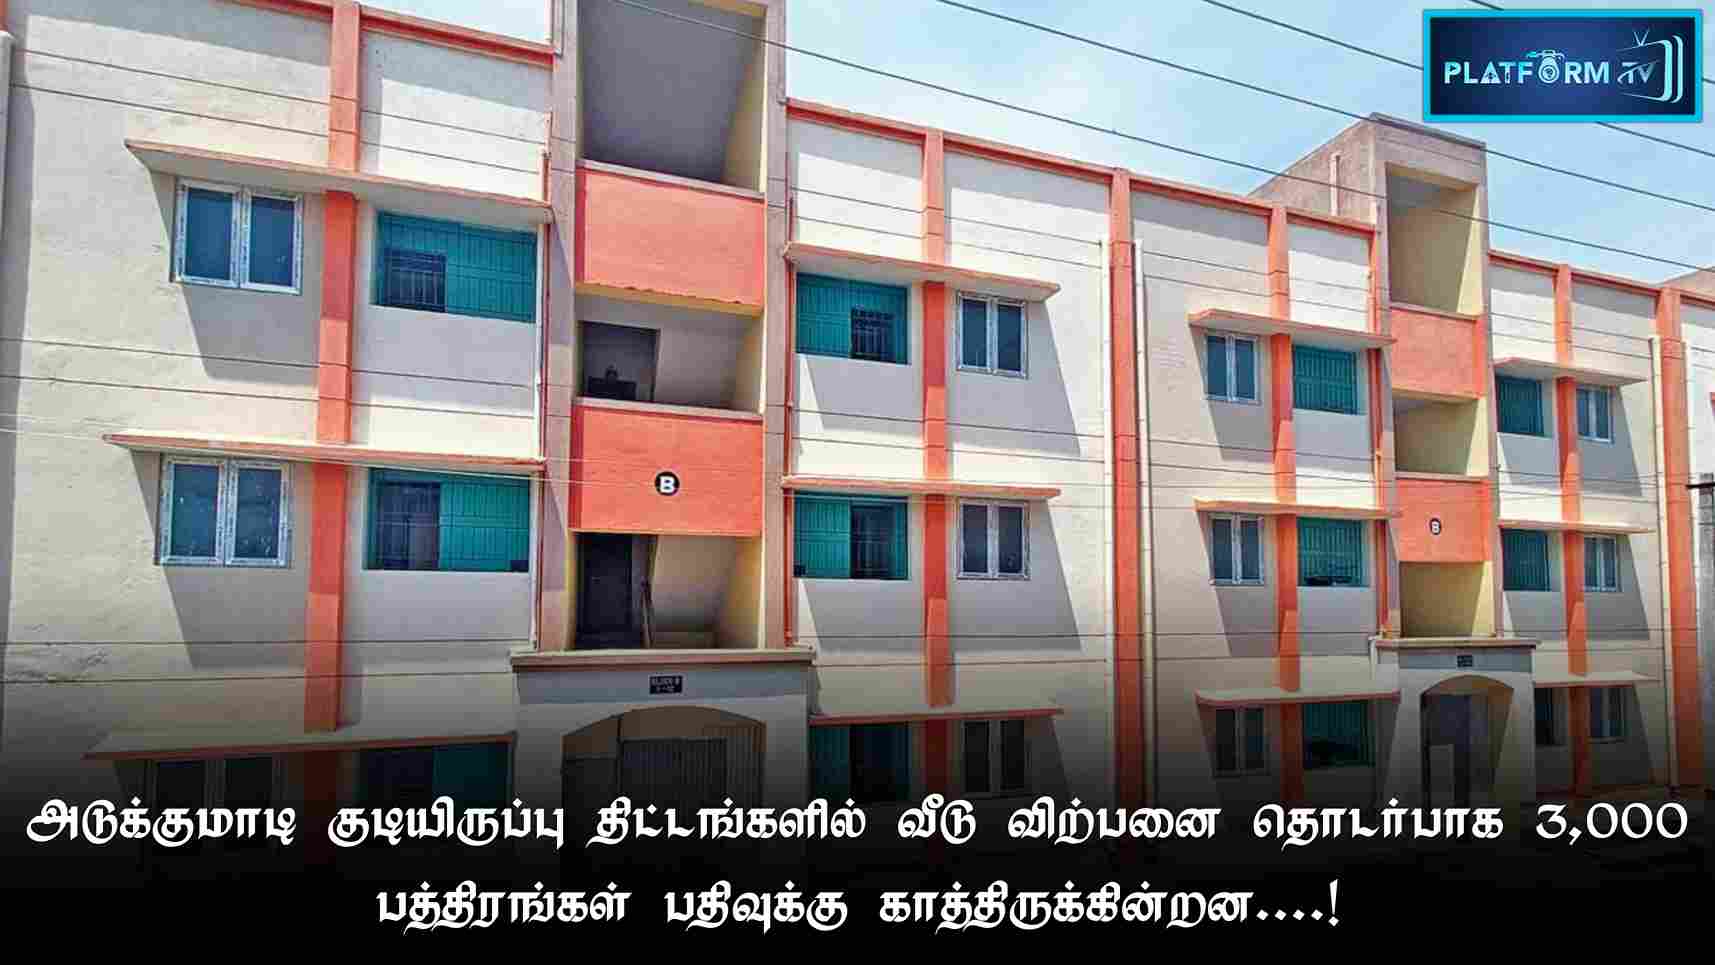 3000 Bonds Pending In Apartment Projects - Platform Tamil